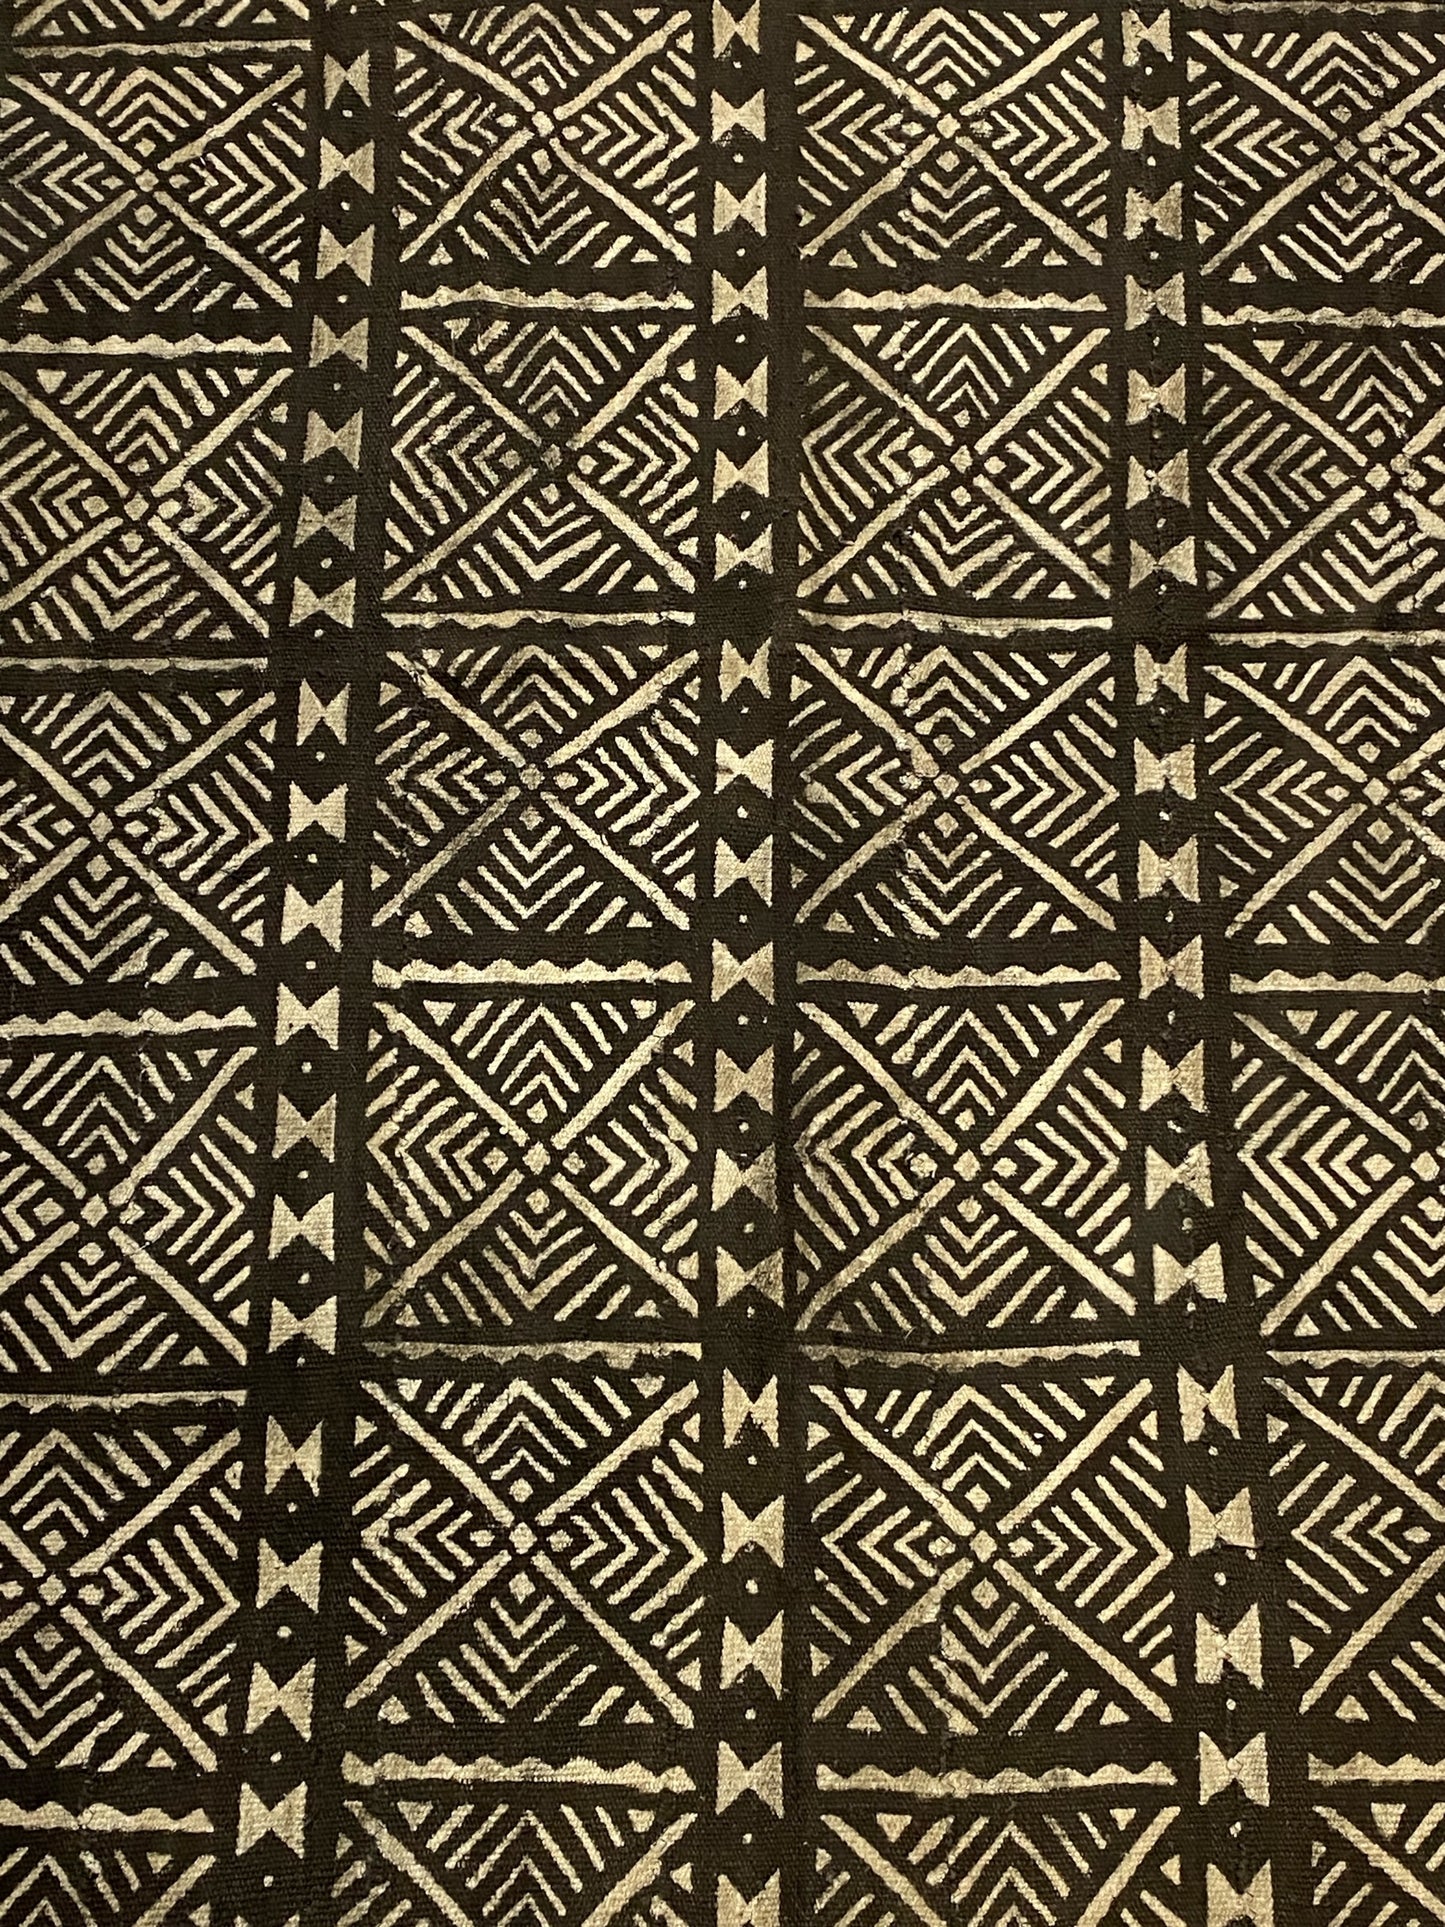 # 5969 African Black and White Mud Cloth Textile Mali 59"